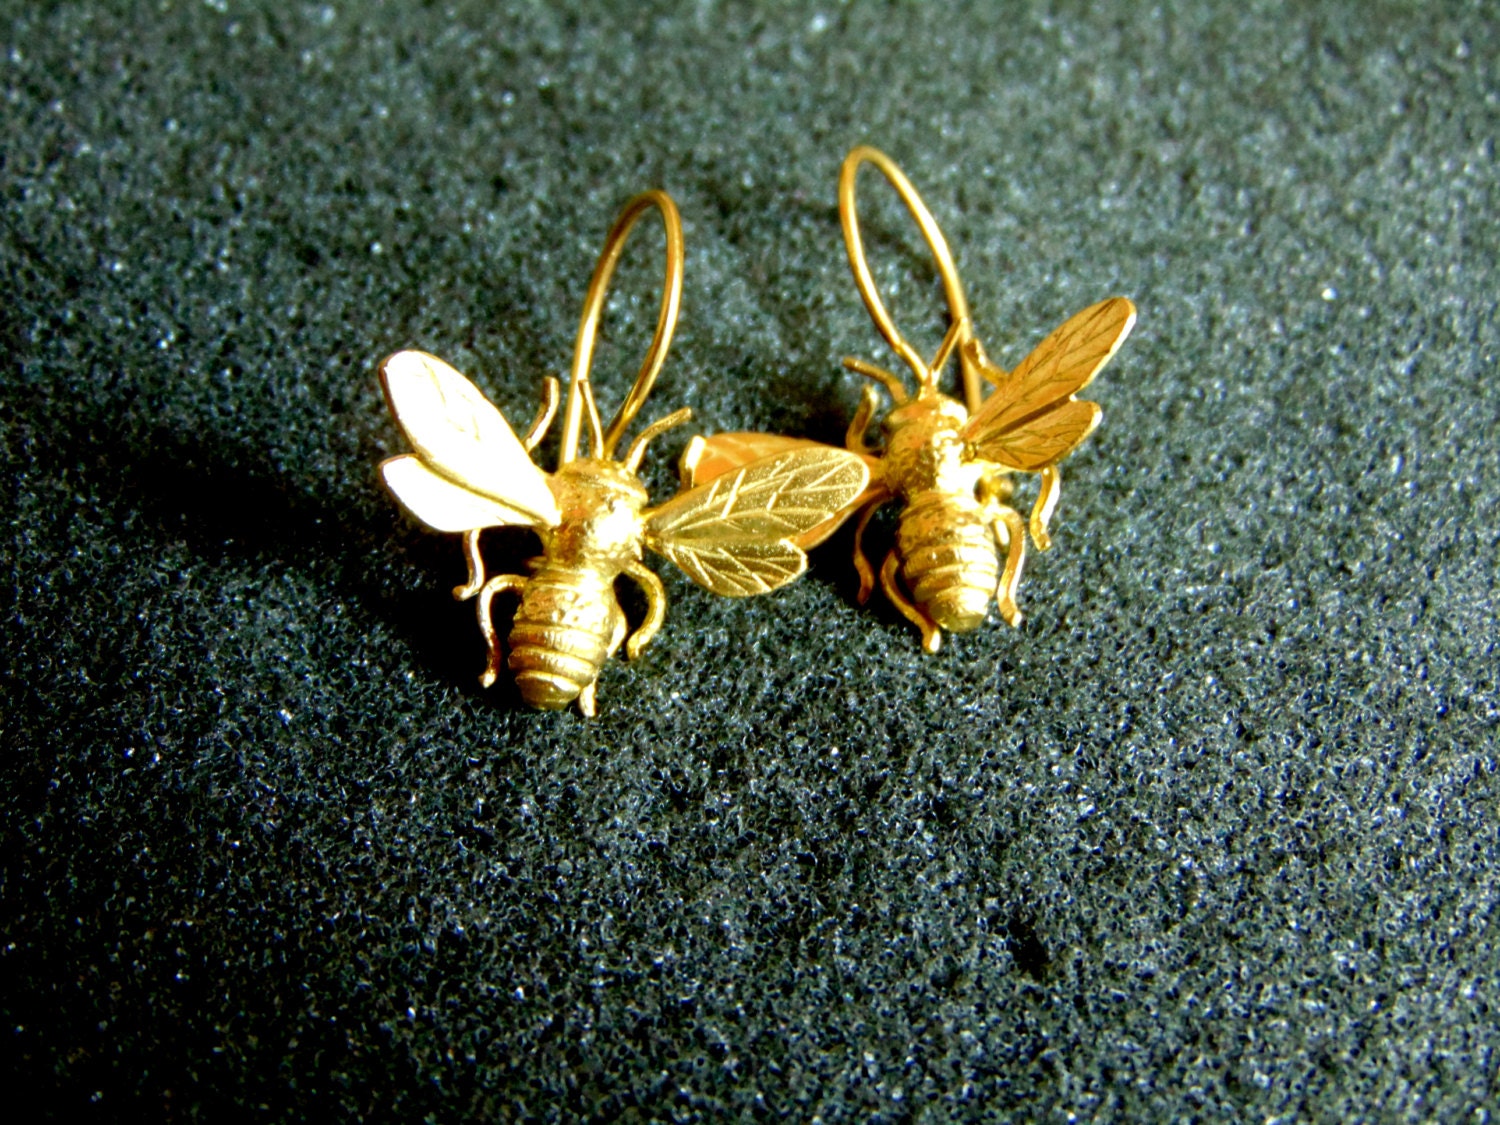 Enamel Antique Gold Honey Bee Earrings Dangle Insects Jewelry Gifts for  Women